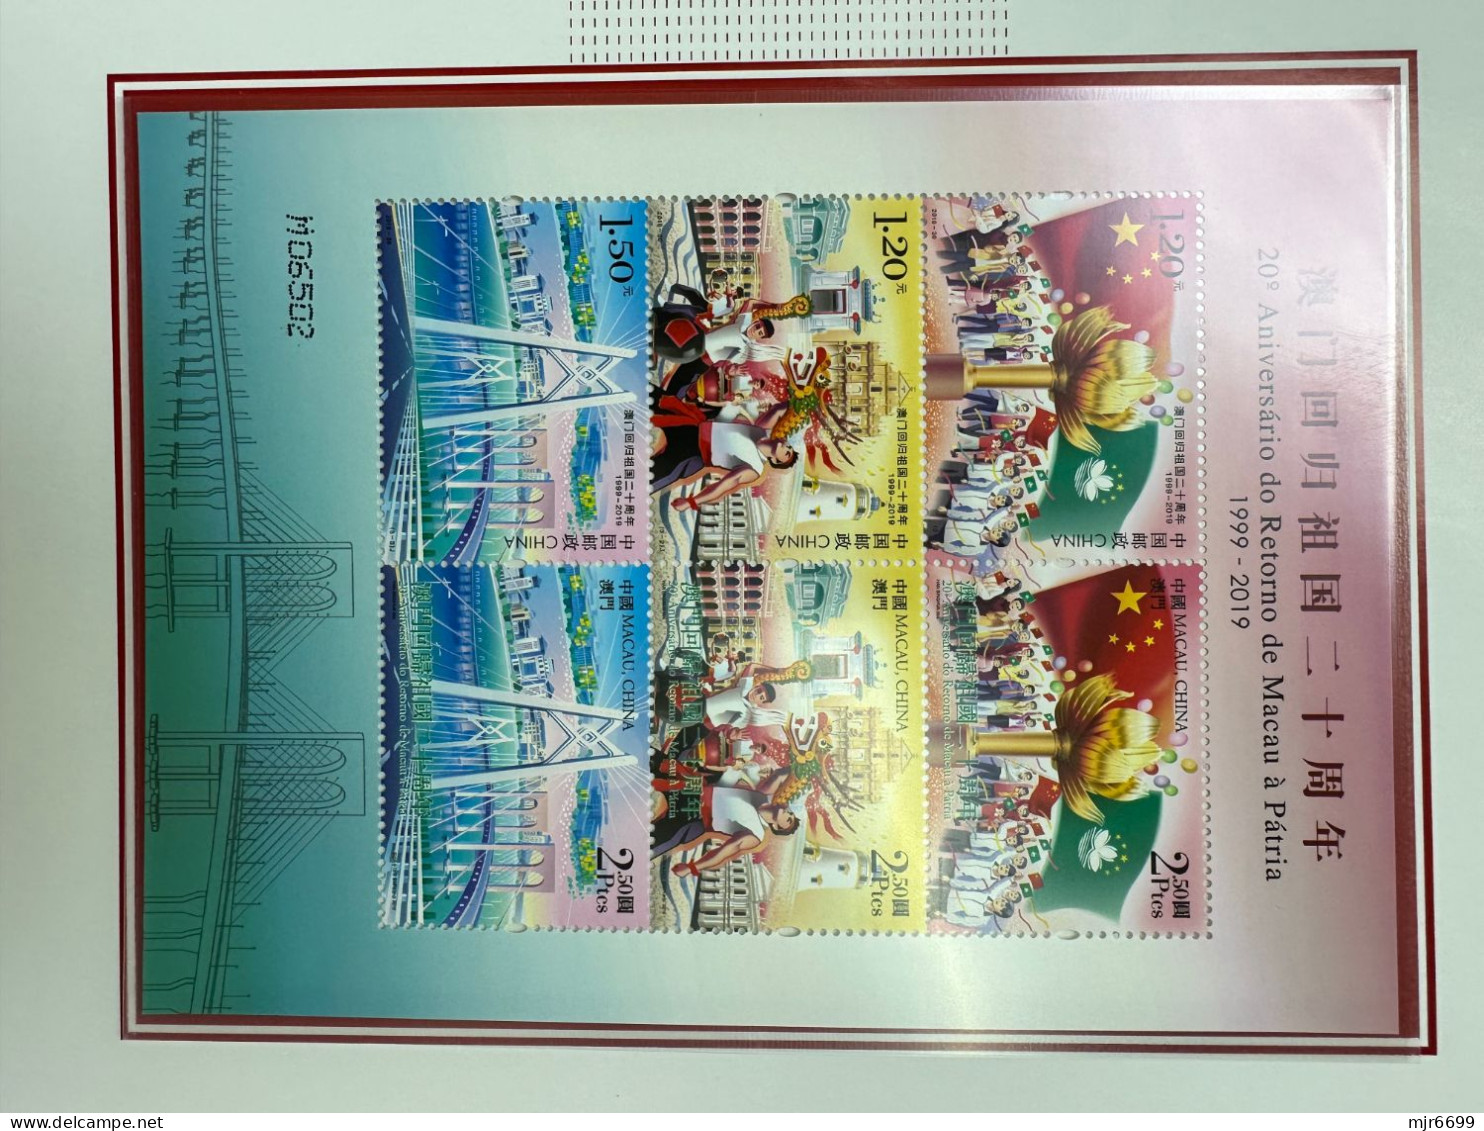 MACAU - 2019 20TH ANNIVERSARY OF THE RETURN TO CHINA SPECIAL SHEETLET IN FOLDER - Booklets